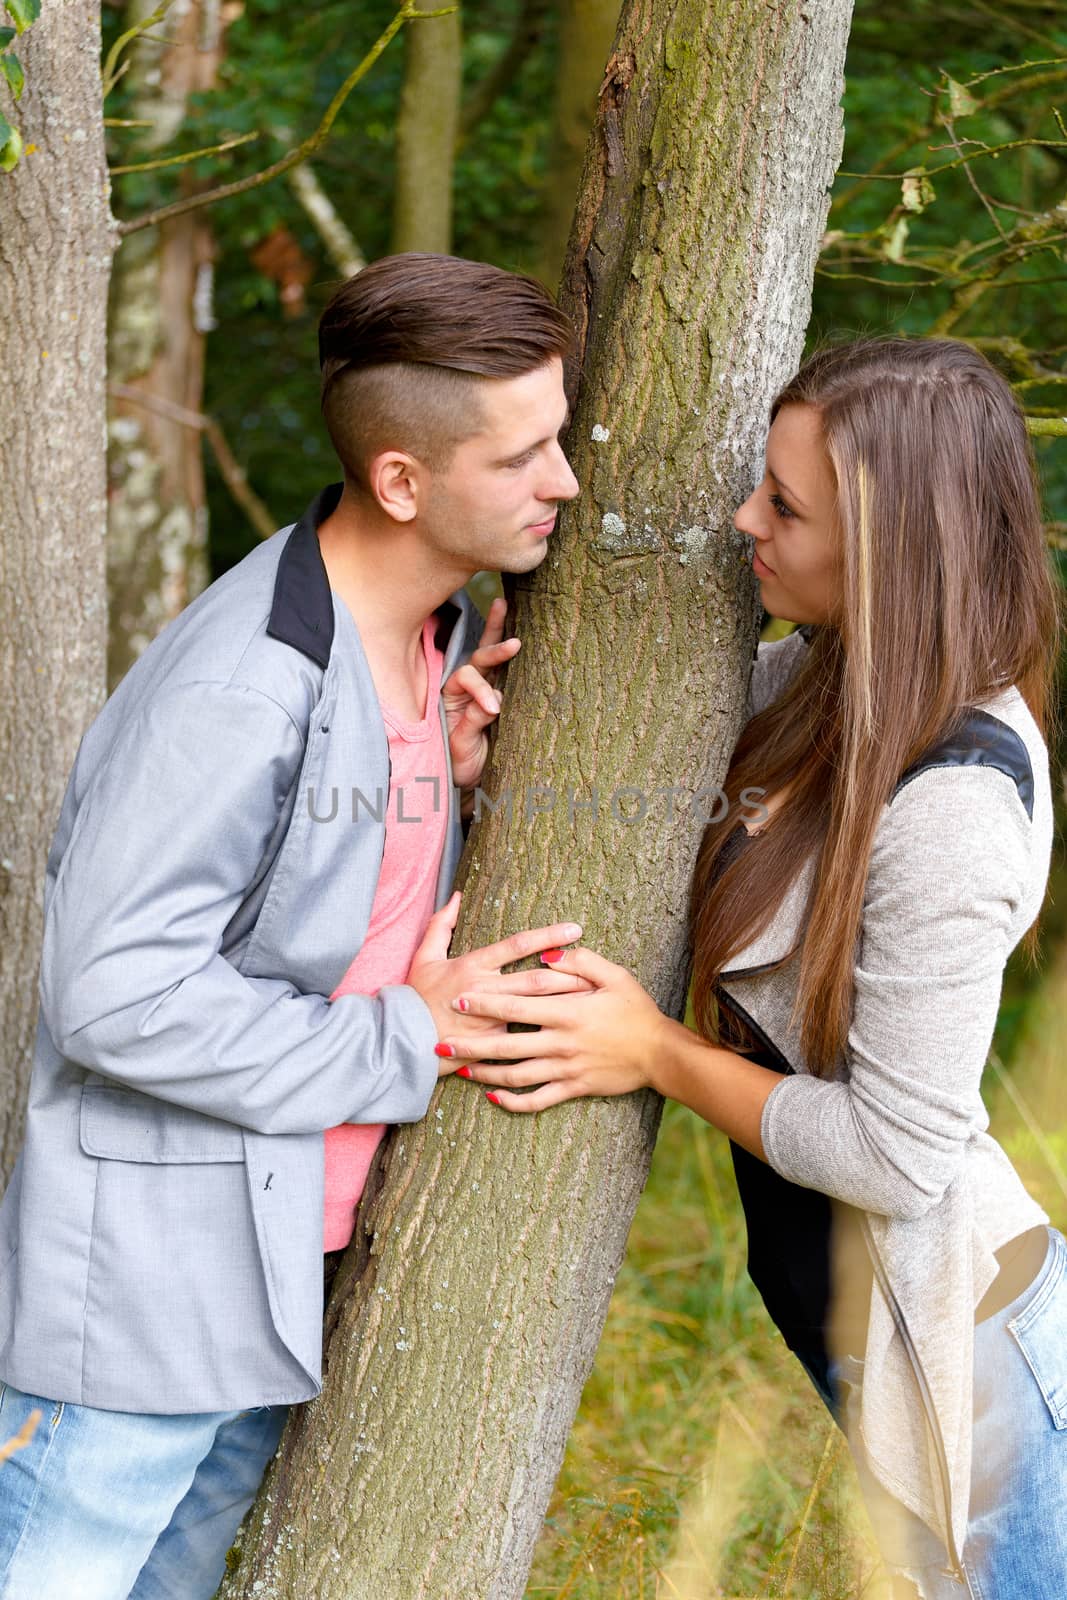 portrait of happy smiling young couple in love embracing outdoor at sunny day